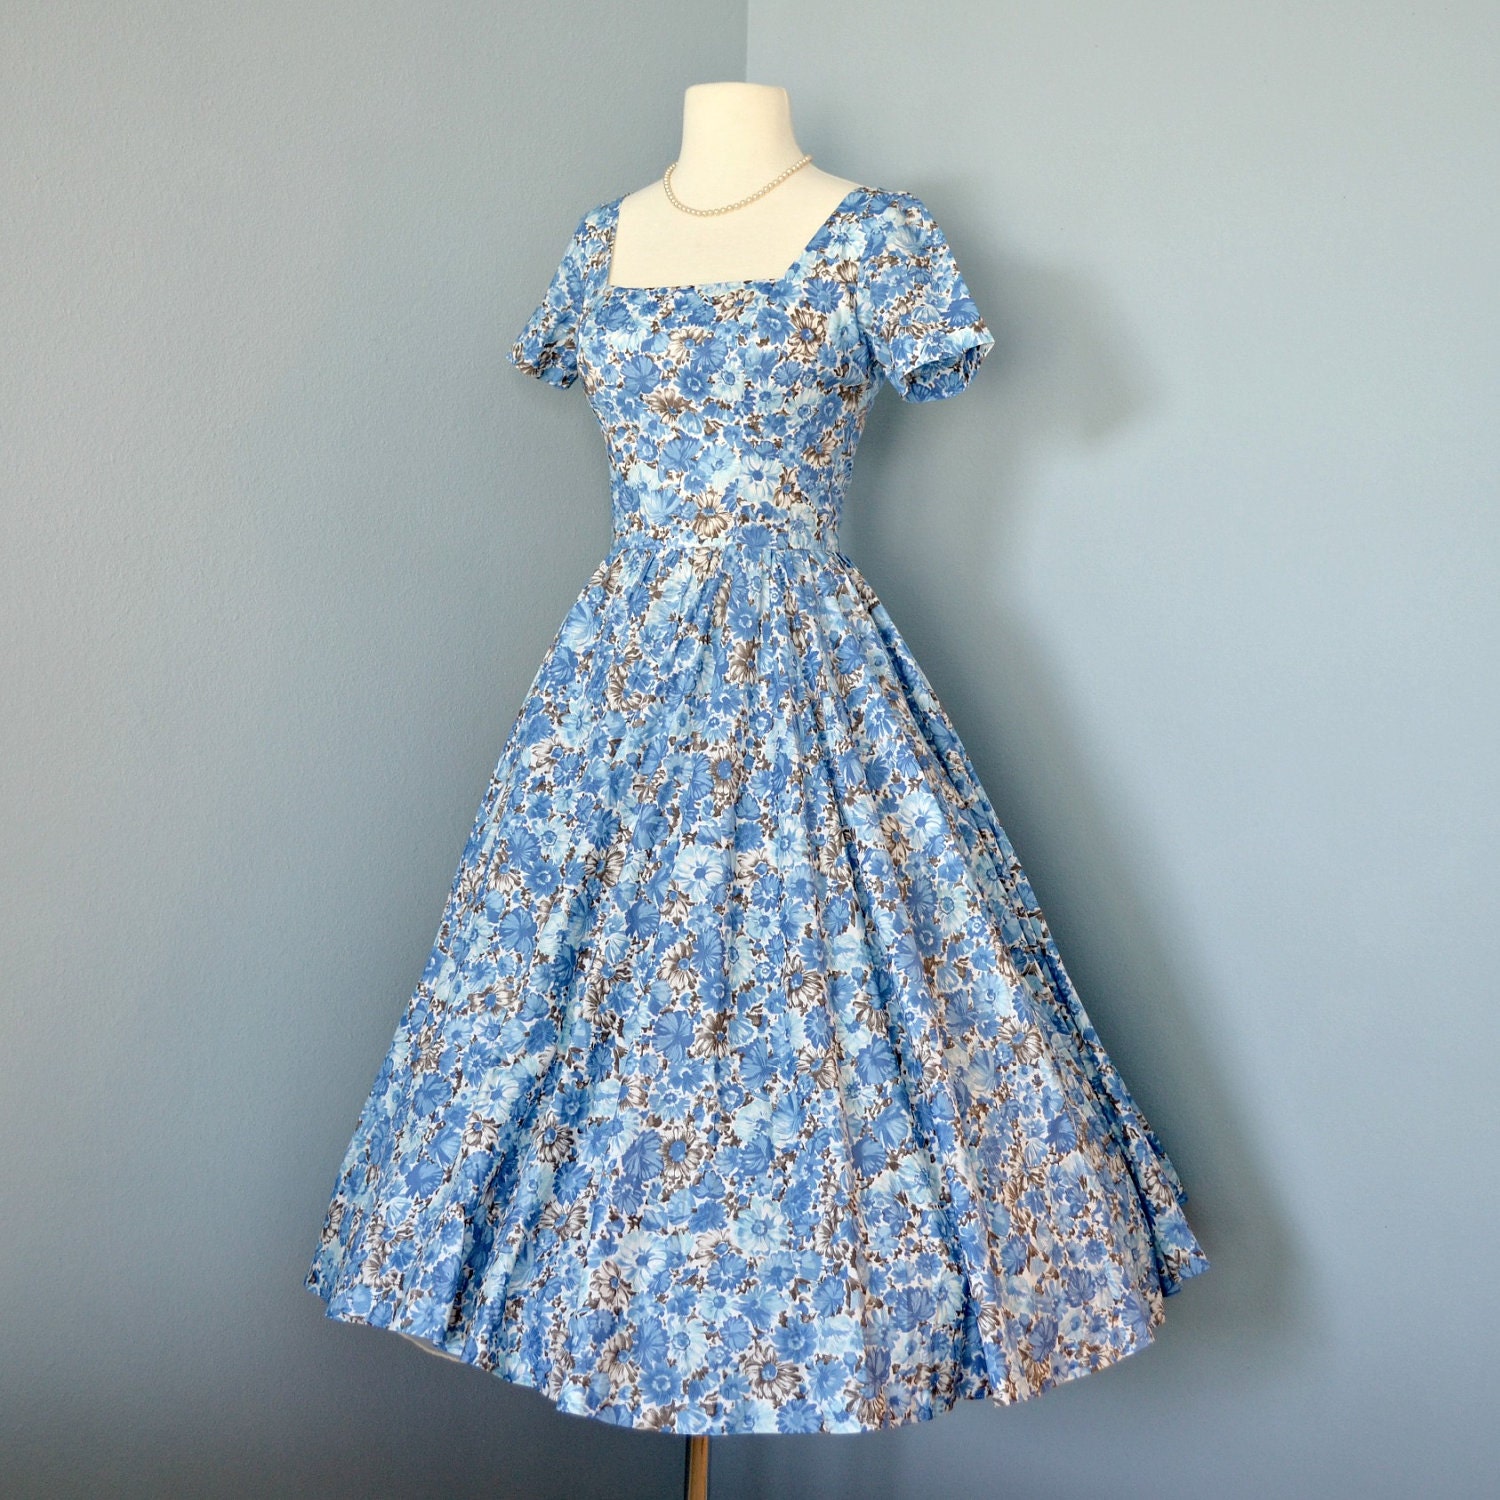 Vintage Cotton Day Dress Lovely 1950s 1960s Cotton Blue And